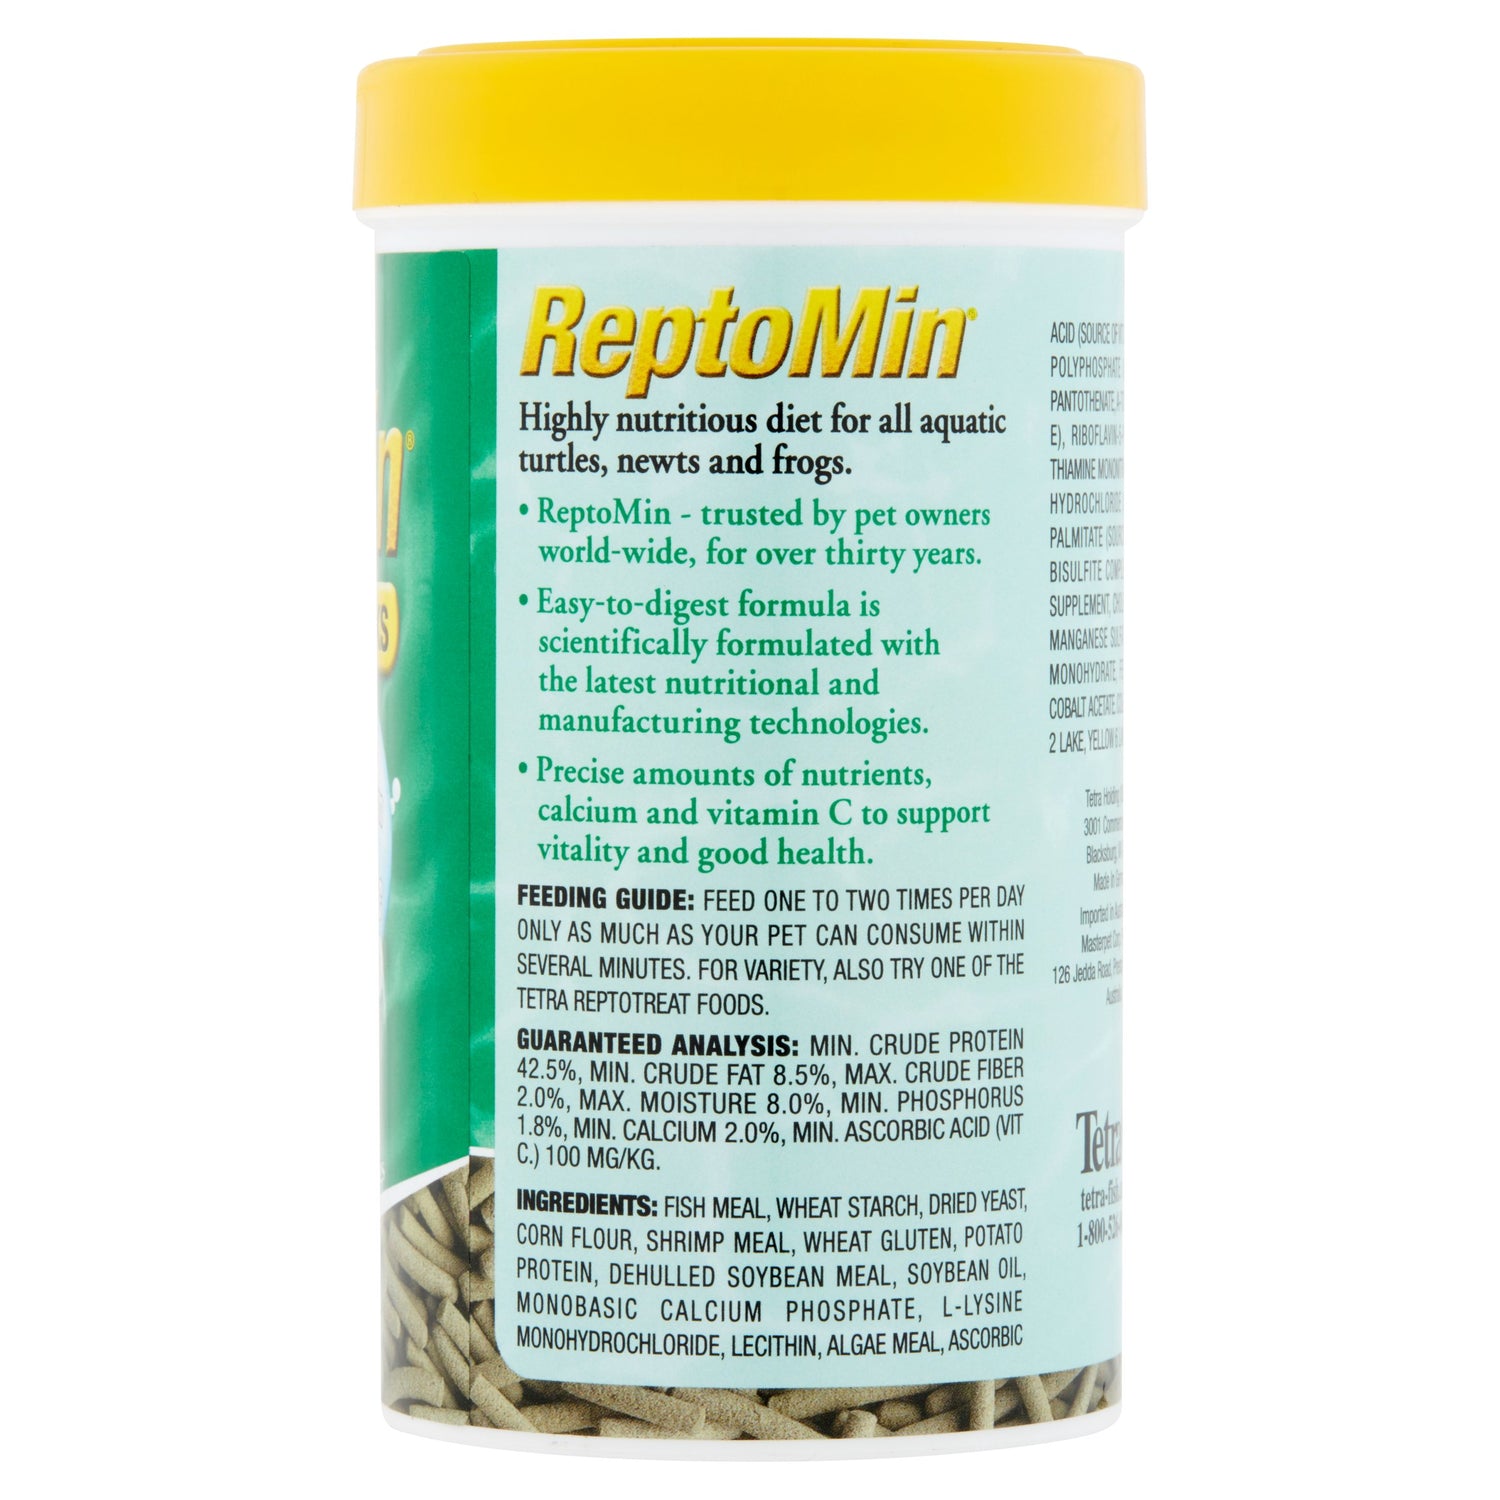 Tetra Reptomin Multicolor Floating Food Sticks 3.7 Ounces, for Aquatic Turtles, Newts and Frogs